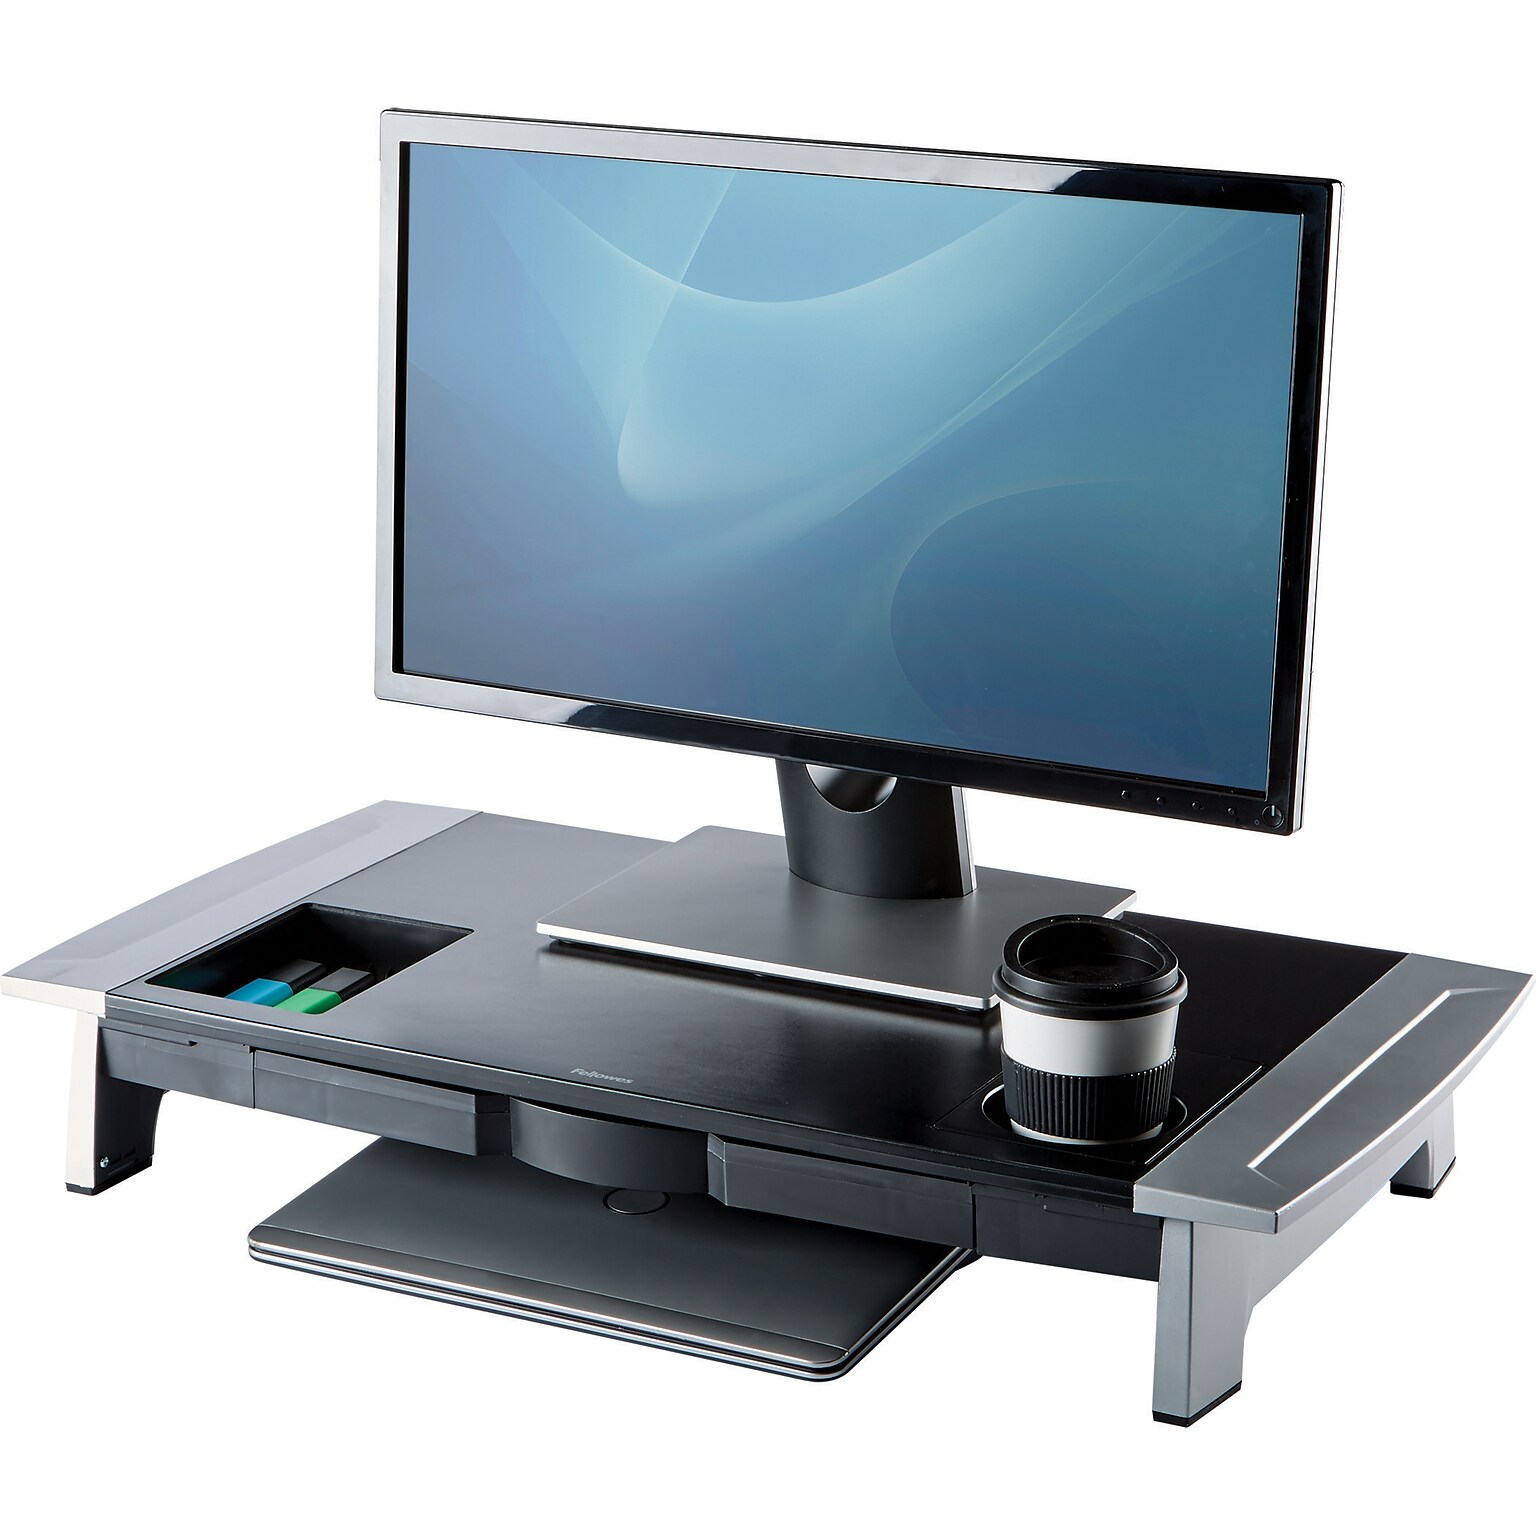 Fellowes Office Suites Premium Monitor Riser, Monitors up to 80 lbs.,Black/Silver (8031001)